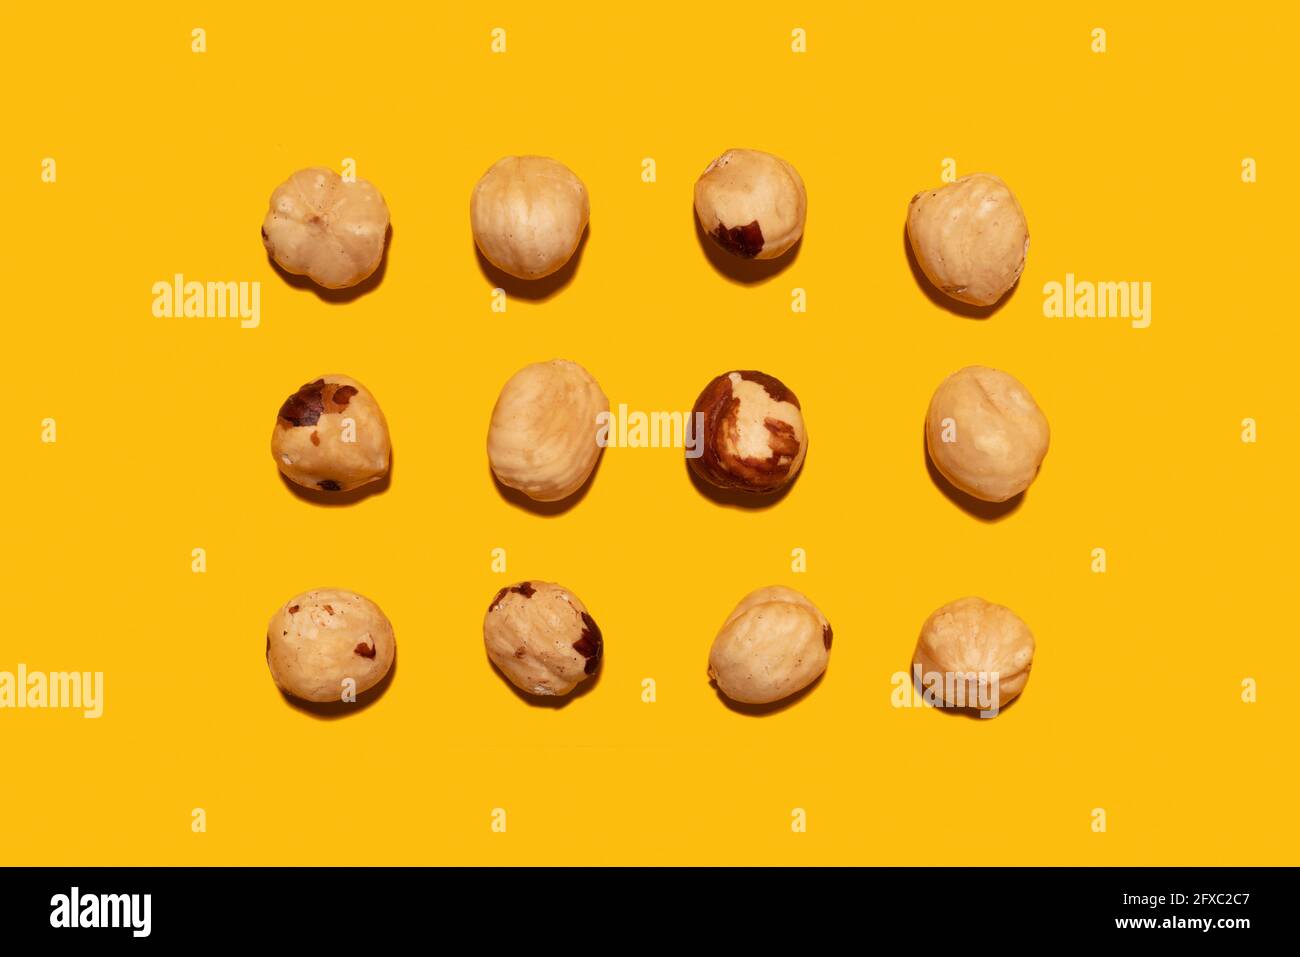 Imperfect organic roasted hazelnuts in rows against yellow background Stock Photo